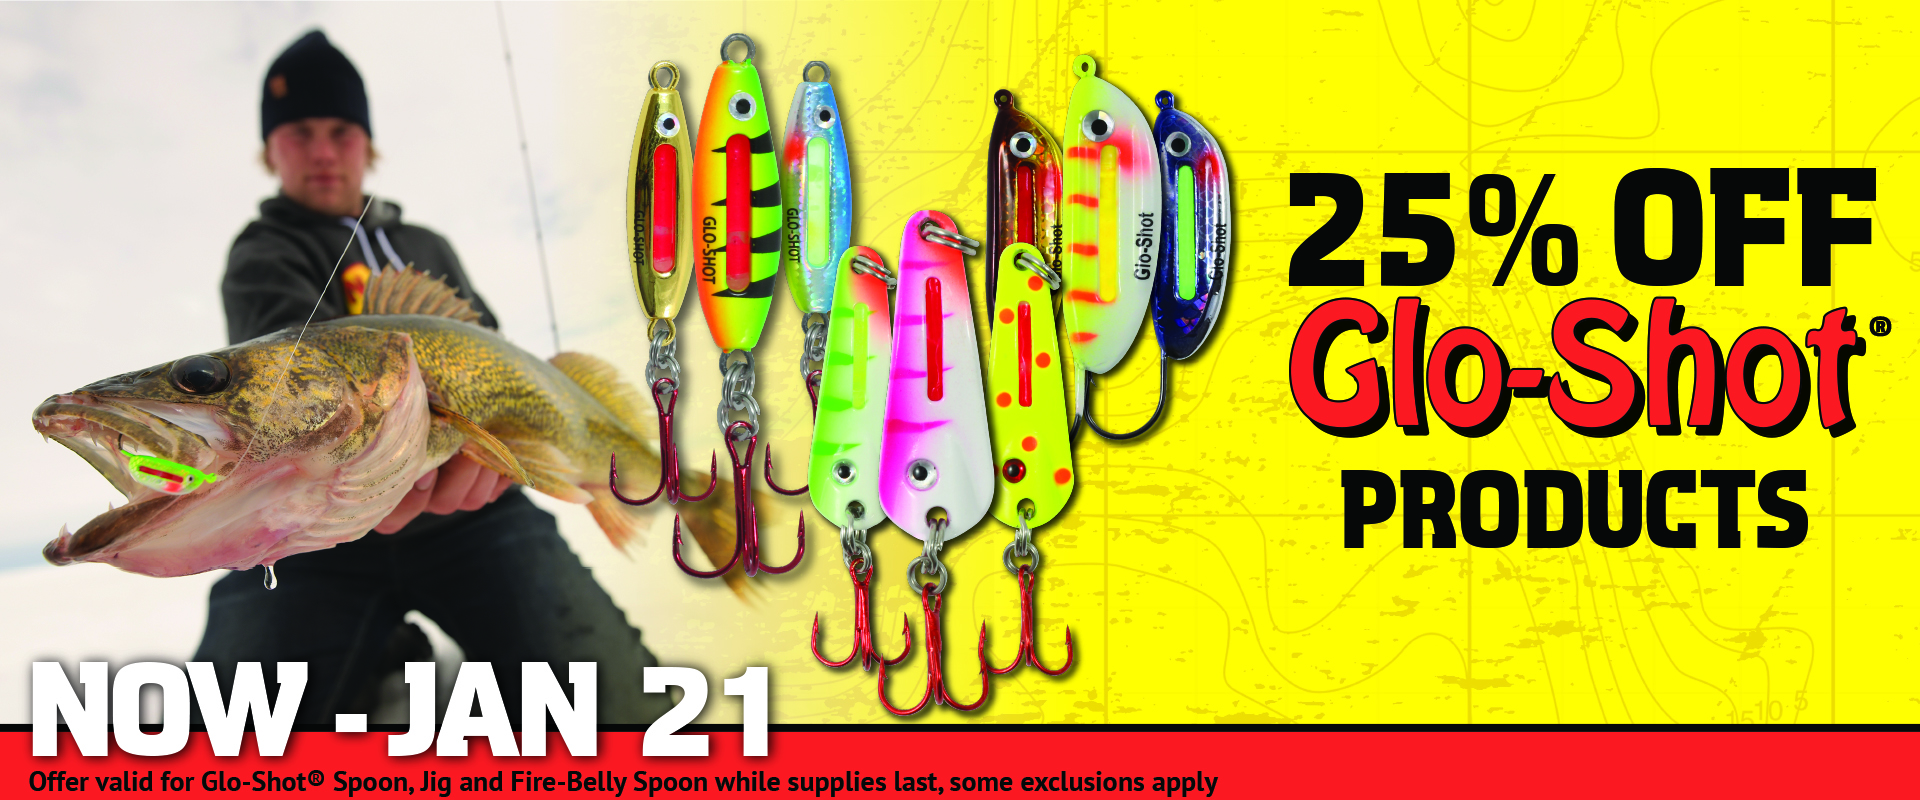 Northland Fishing Tackle Glo-Shot Products 25% off